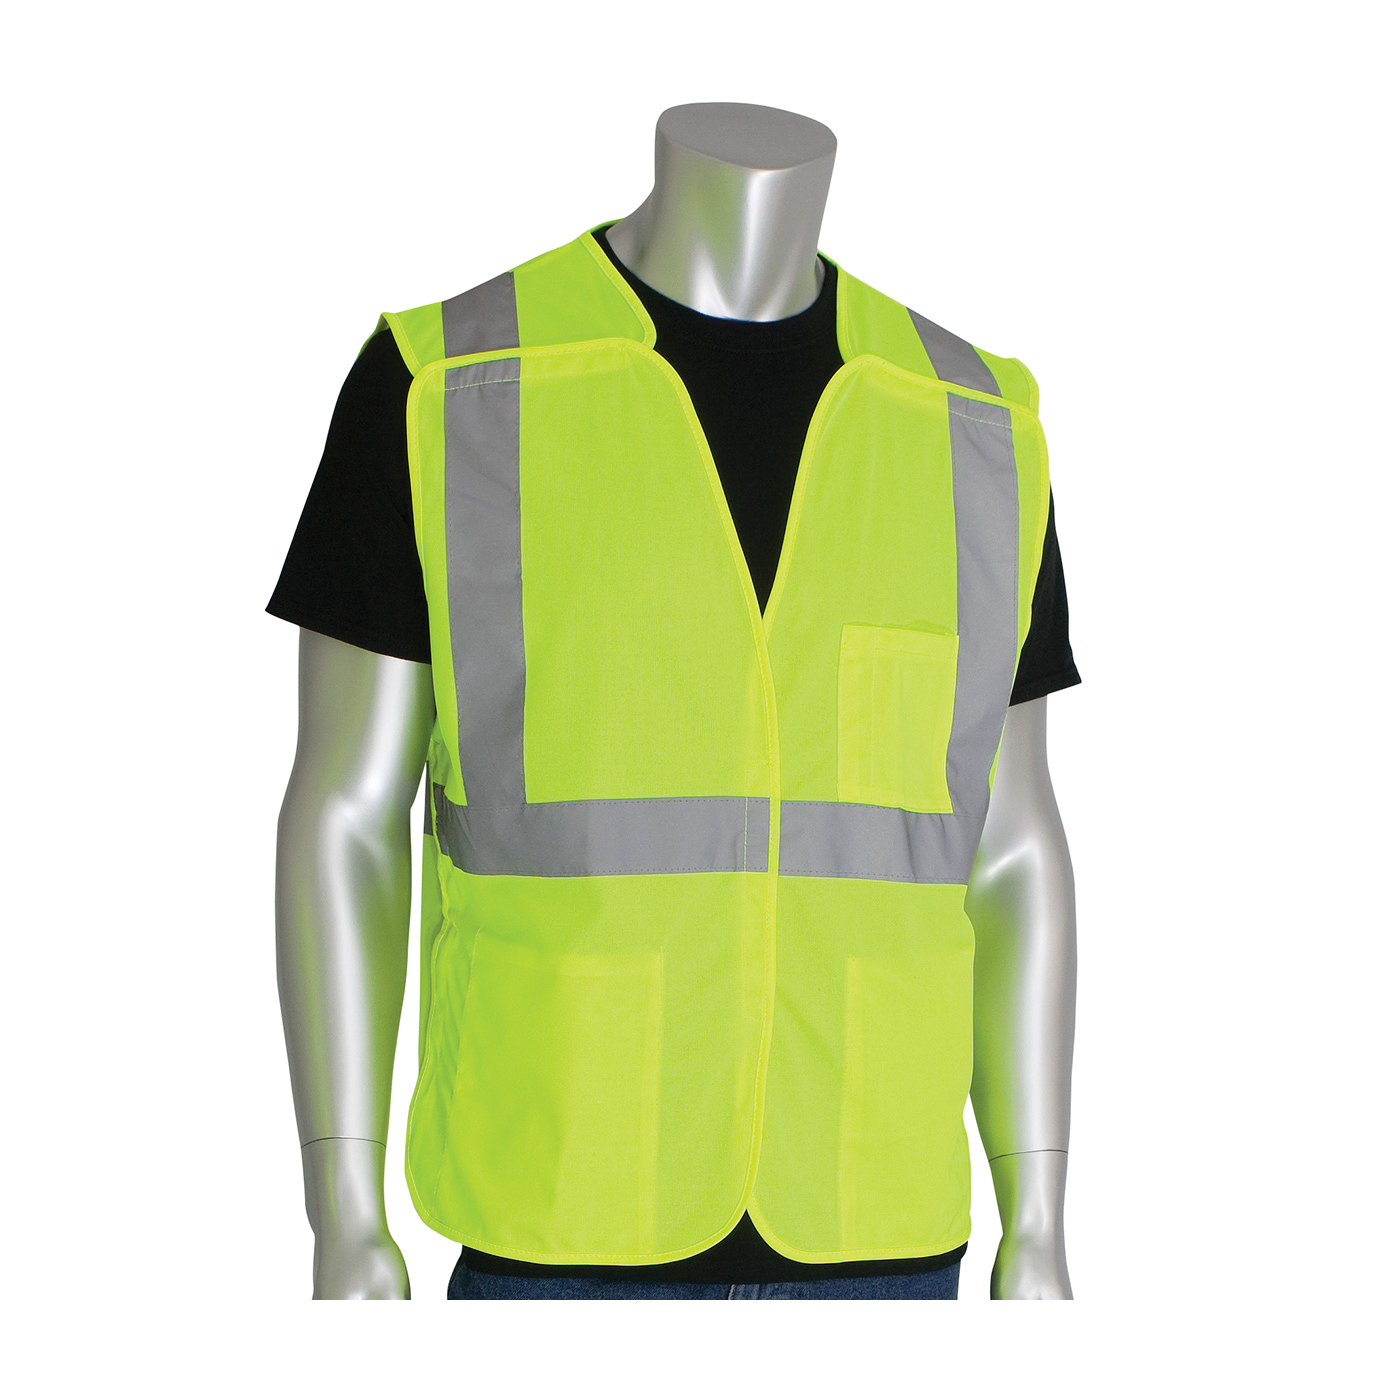 PIP® 302-5PVLY-3X Safety Vest, 3XL, Hi-Viz Lime Yellow, Polyester, Hook and Loop Closure, 3 Pockets, ANSI Class: Class 2, Specifications Met: ANSI 107 Type R